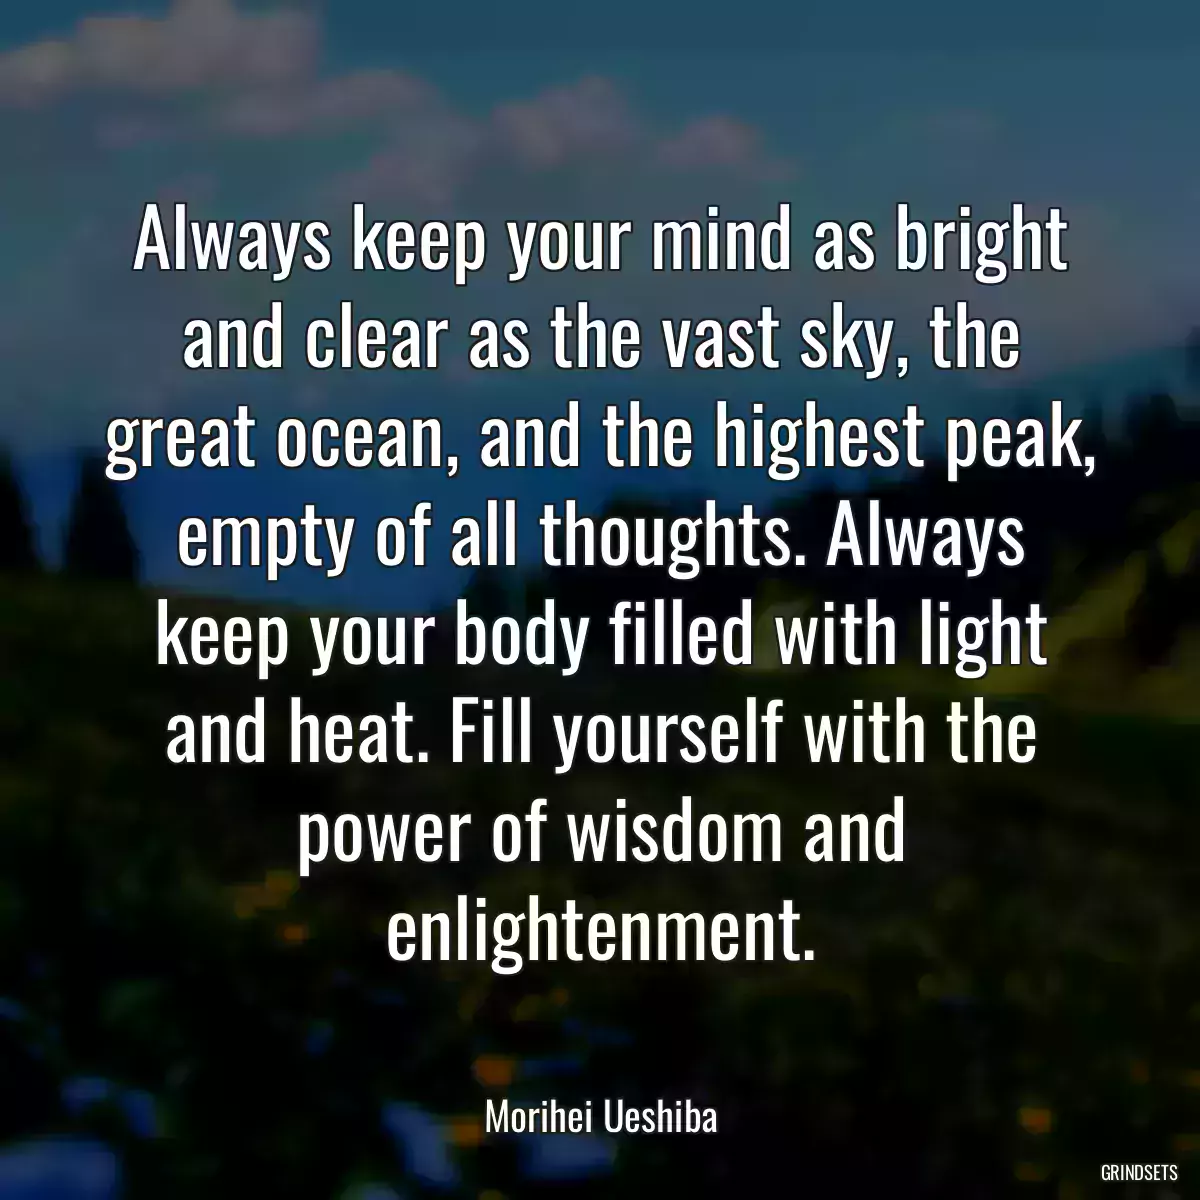 Always keep your mind as bright and clear as the vast sky, the great ocean, and the highest peak, empty of all thoughts. Always keep your body filled with light and heat. Fill yourself with the power of wisdom and enlightenment.